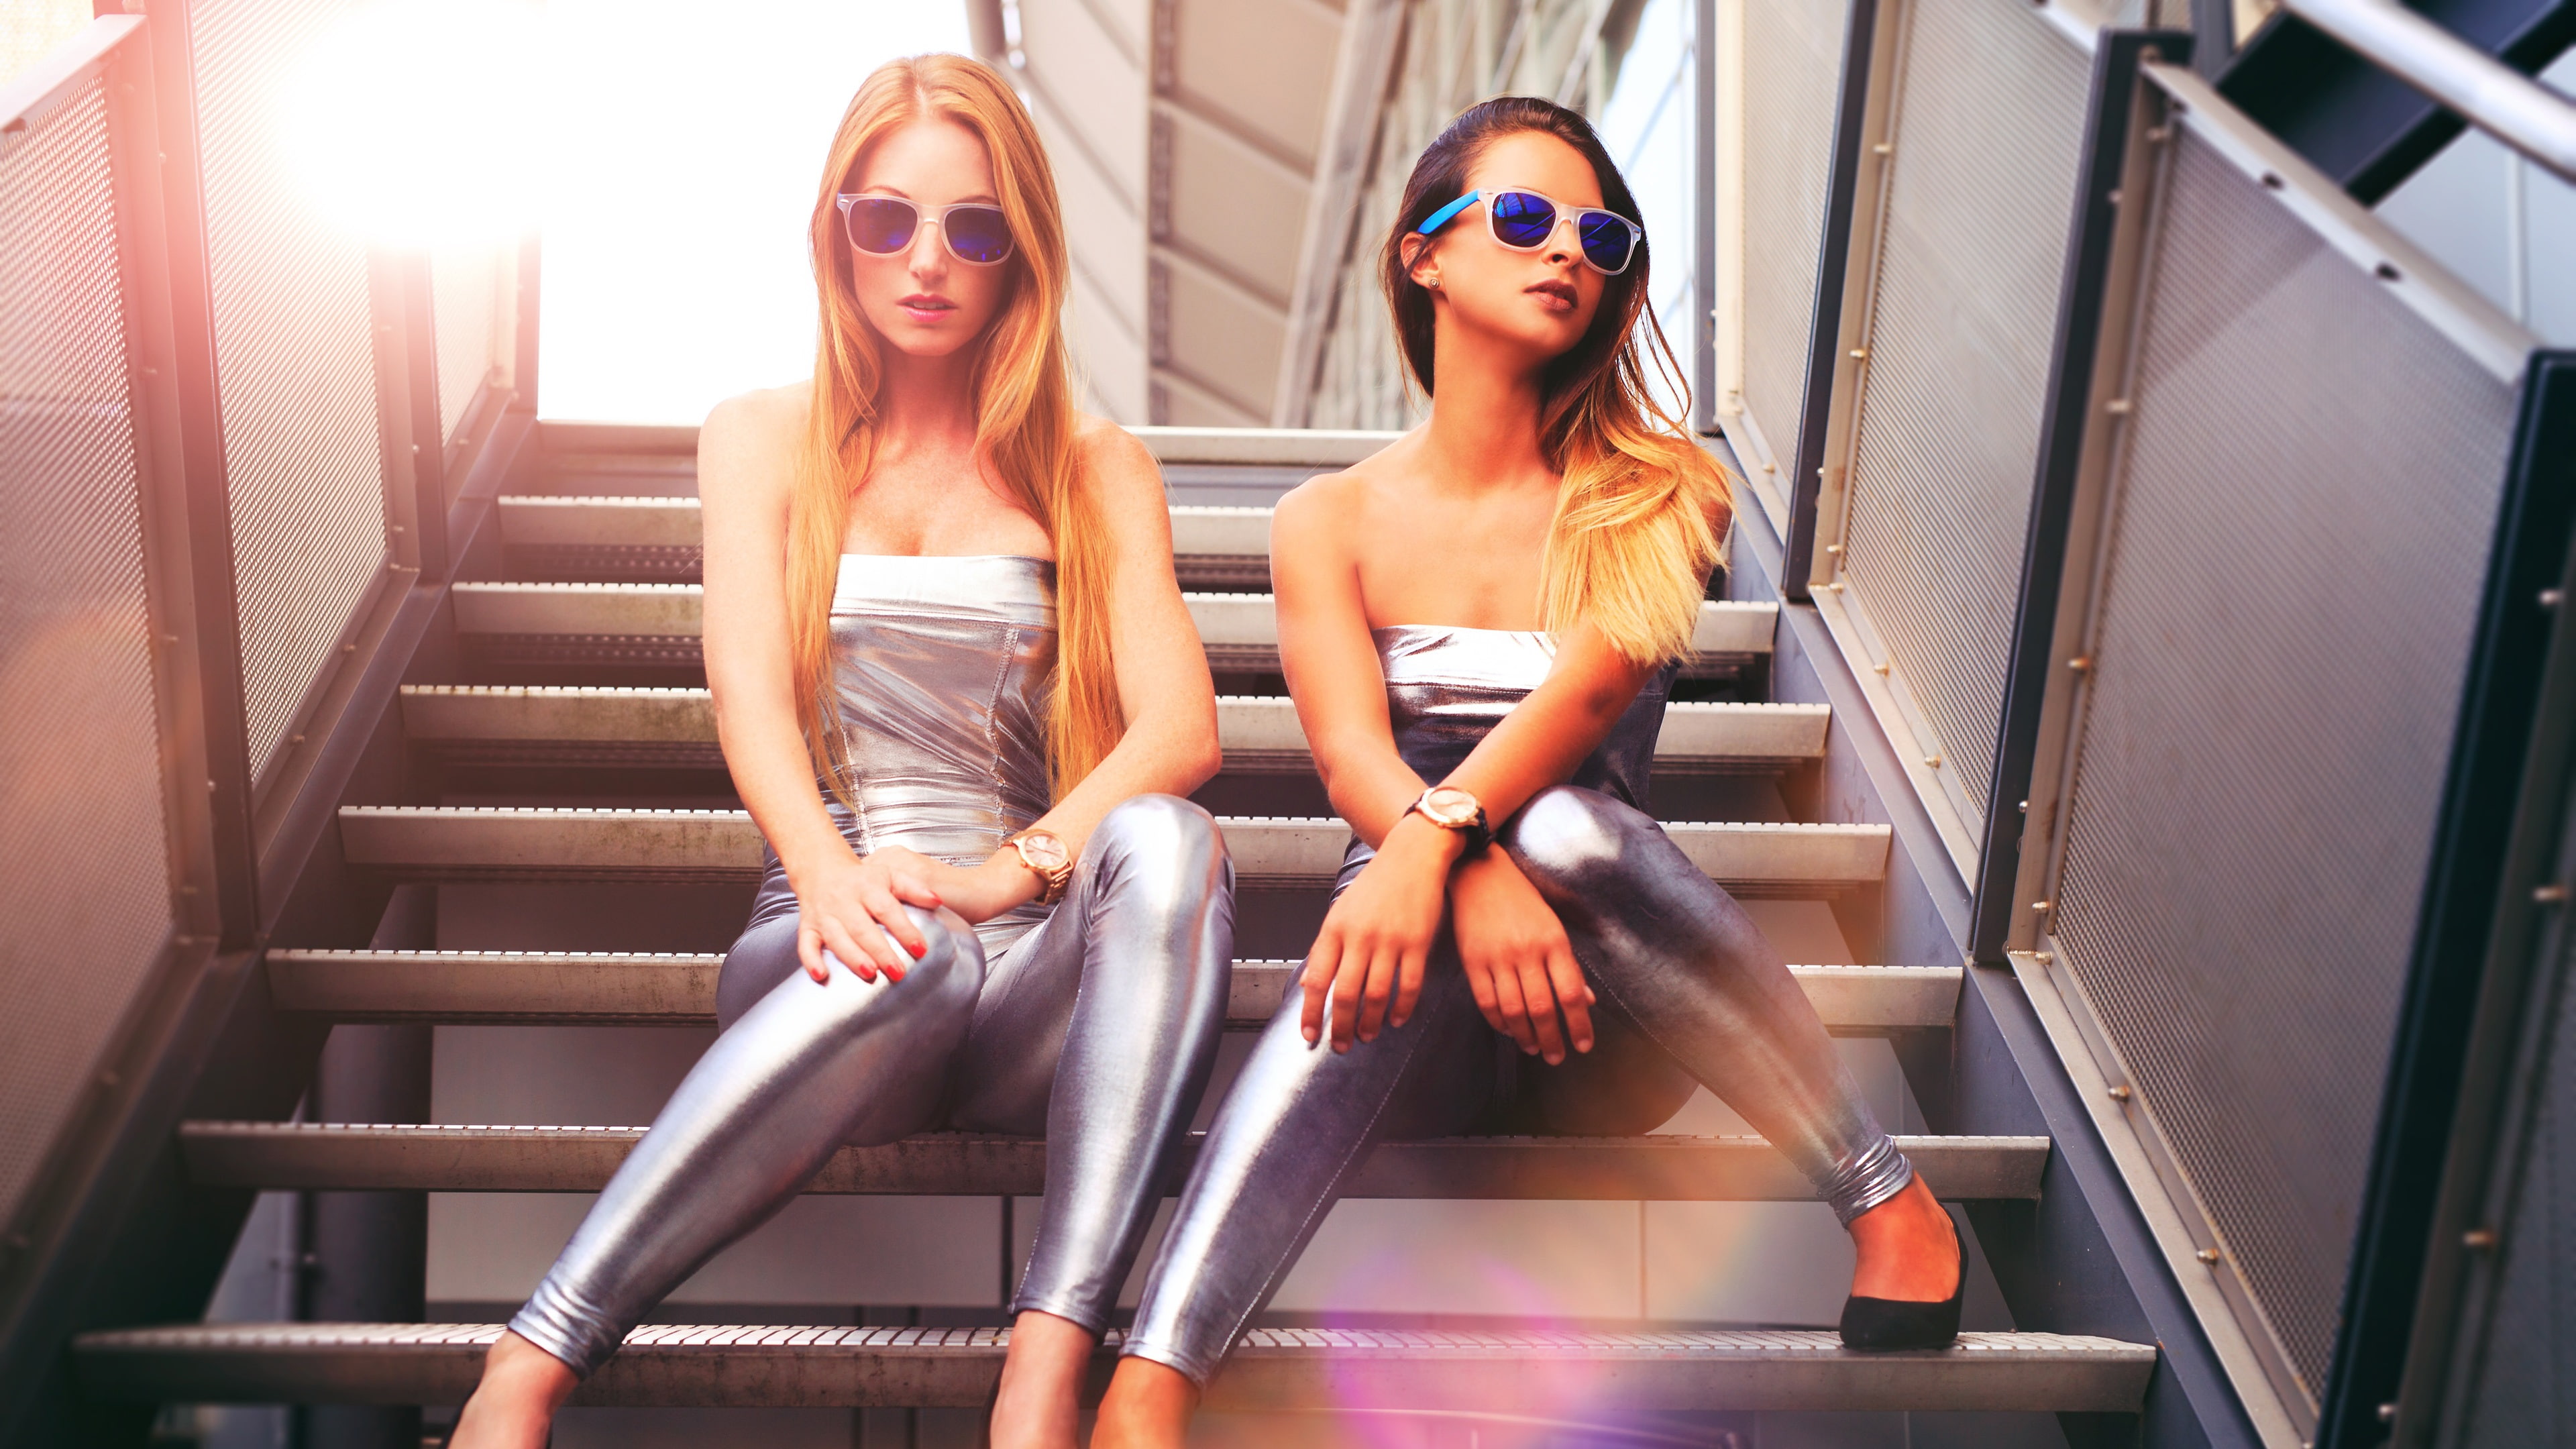 Silver dress girls sit at stairs, glasses, blonde